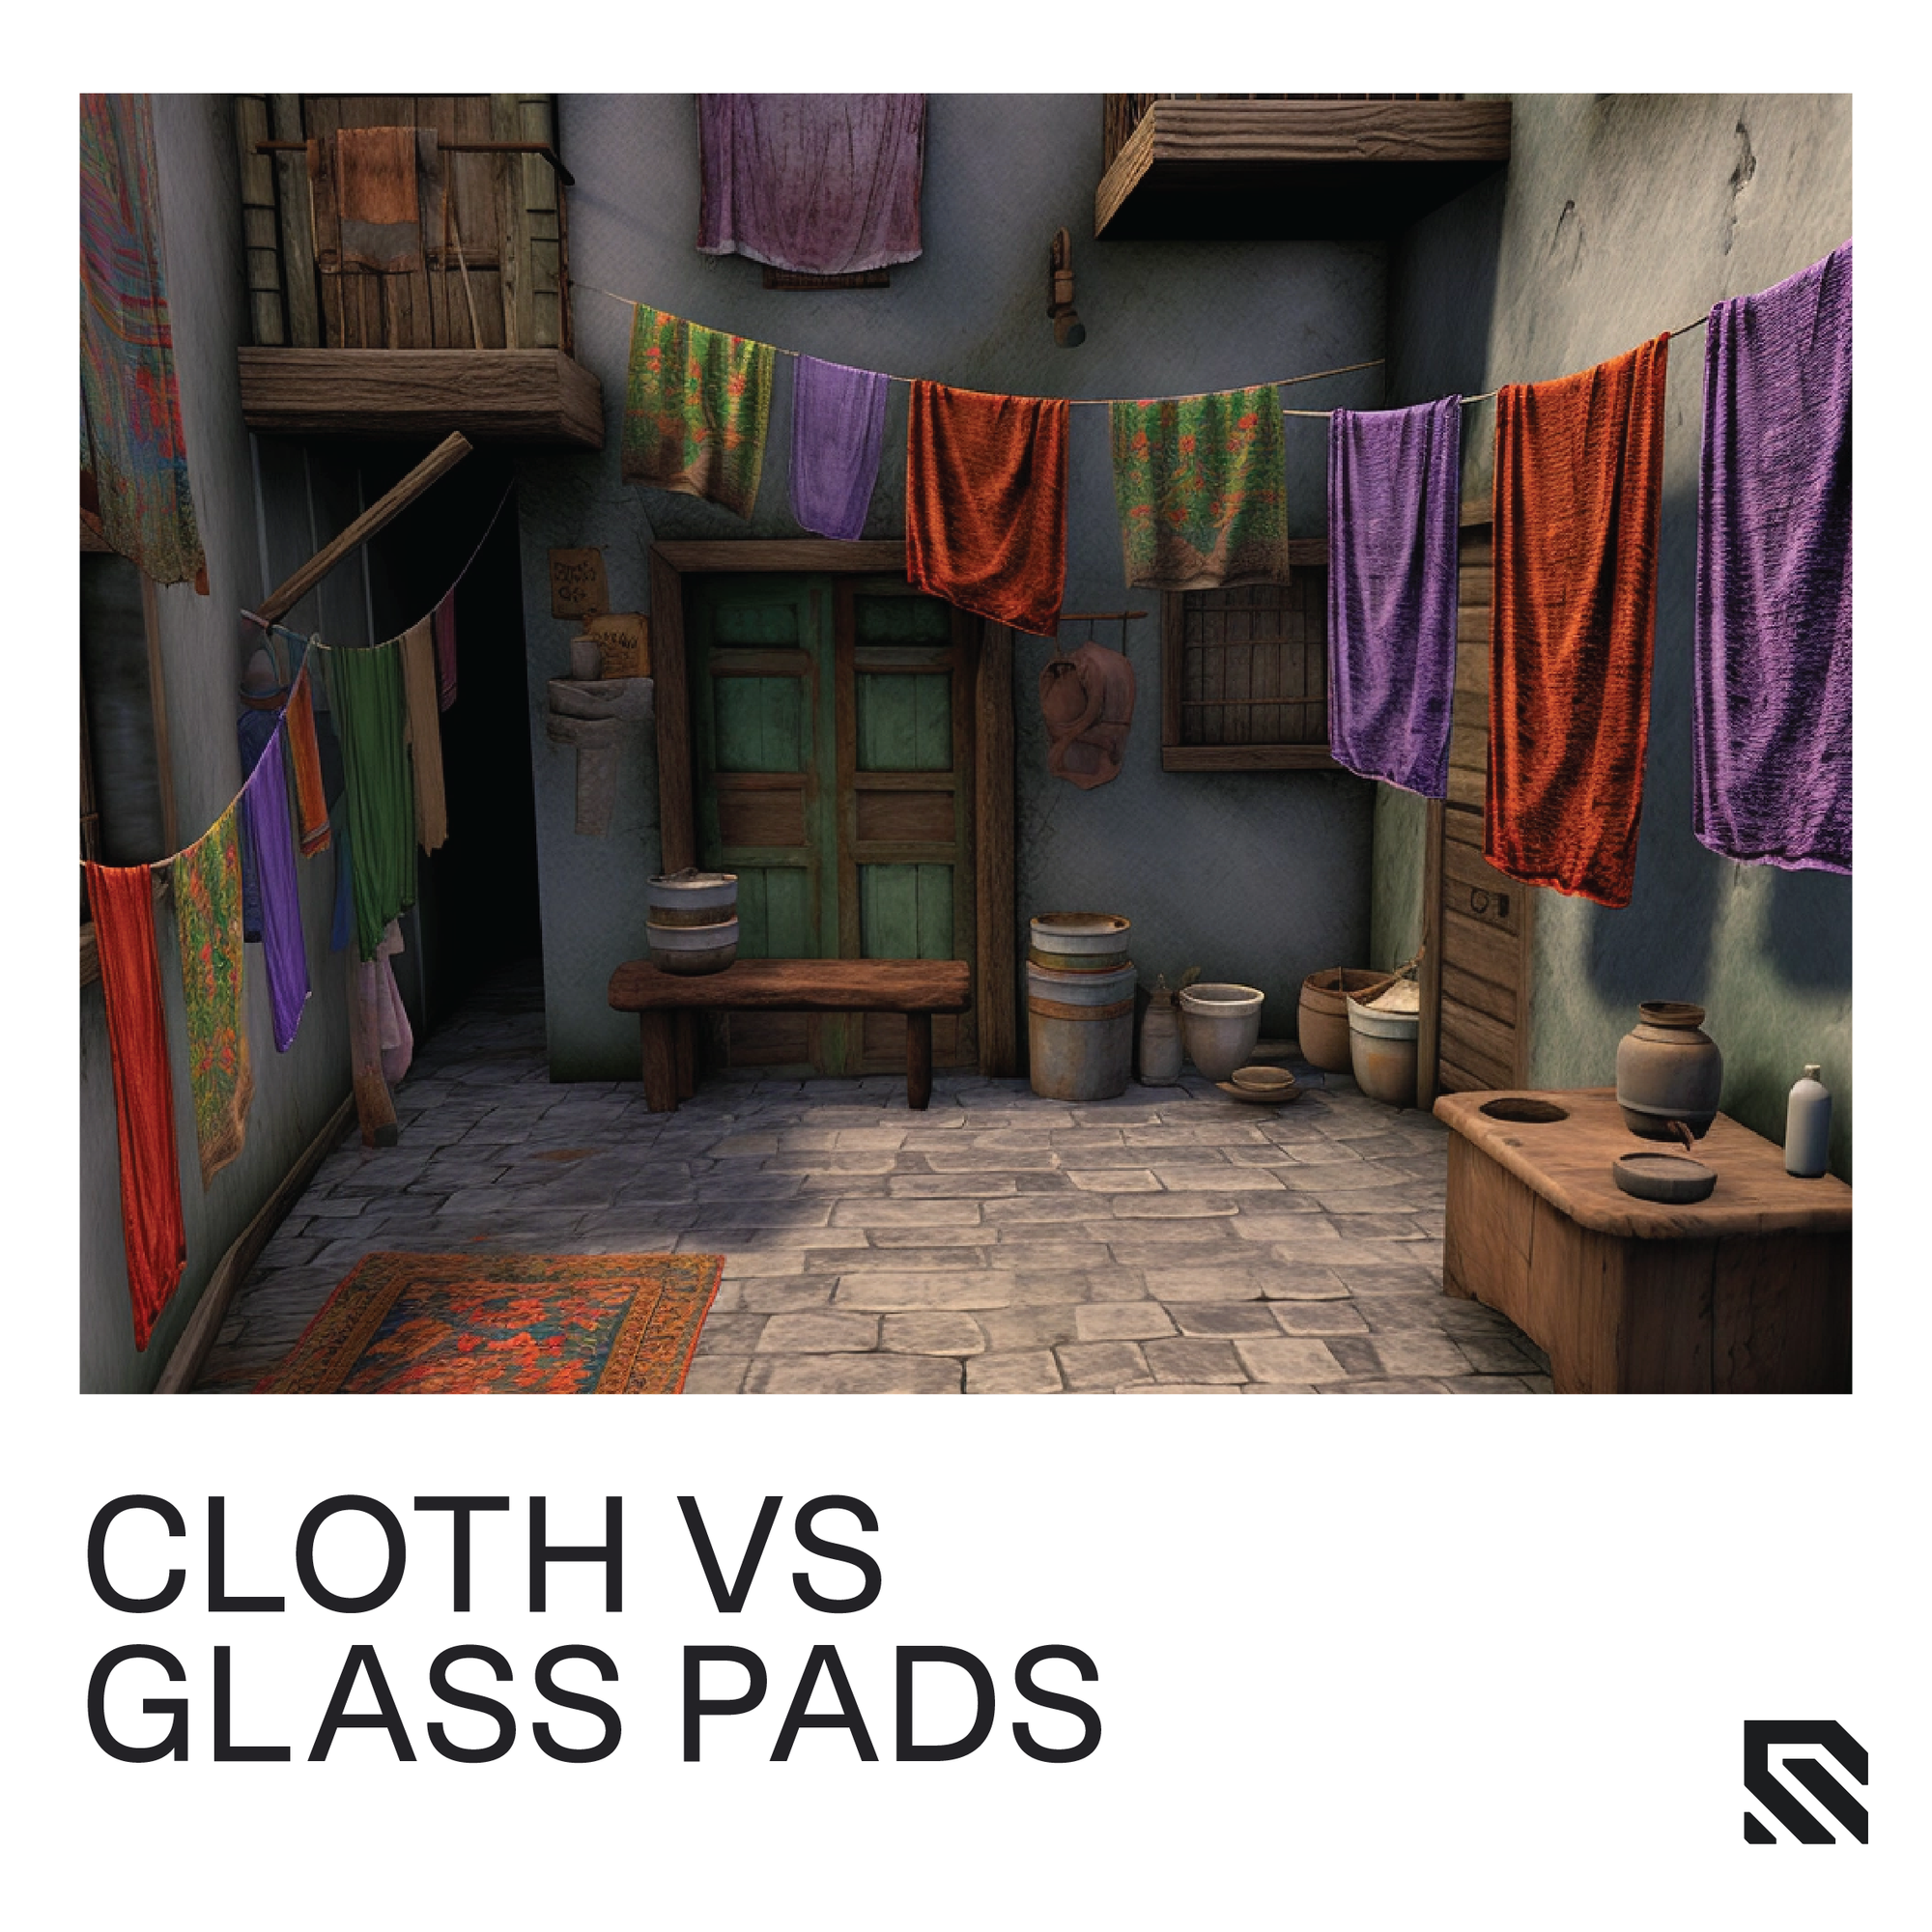 CSGO style environment from a computer game with red and purple clothes hanging on a clothesline